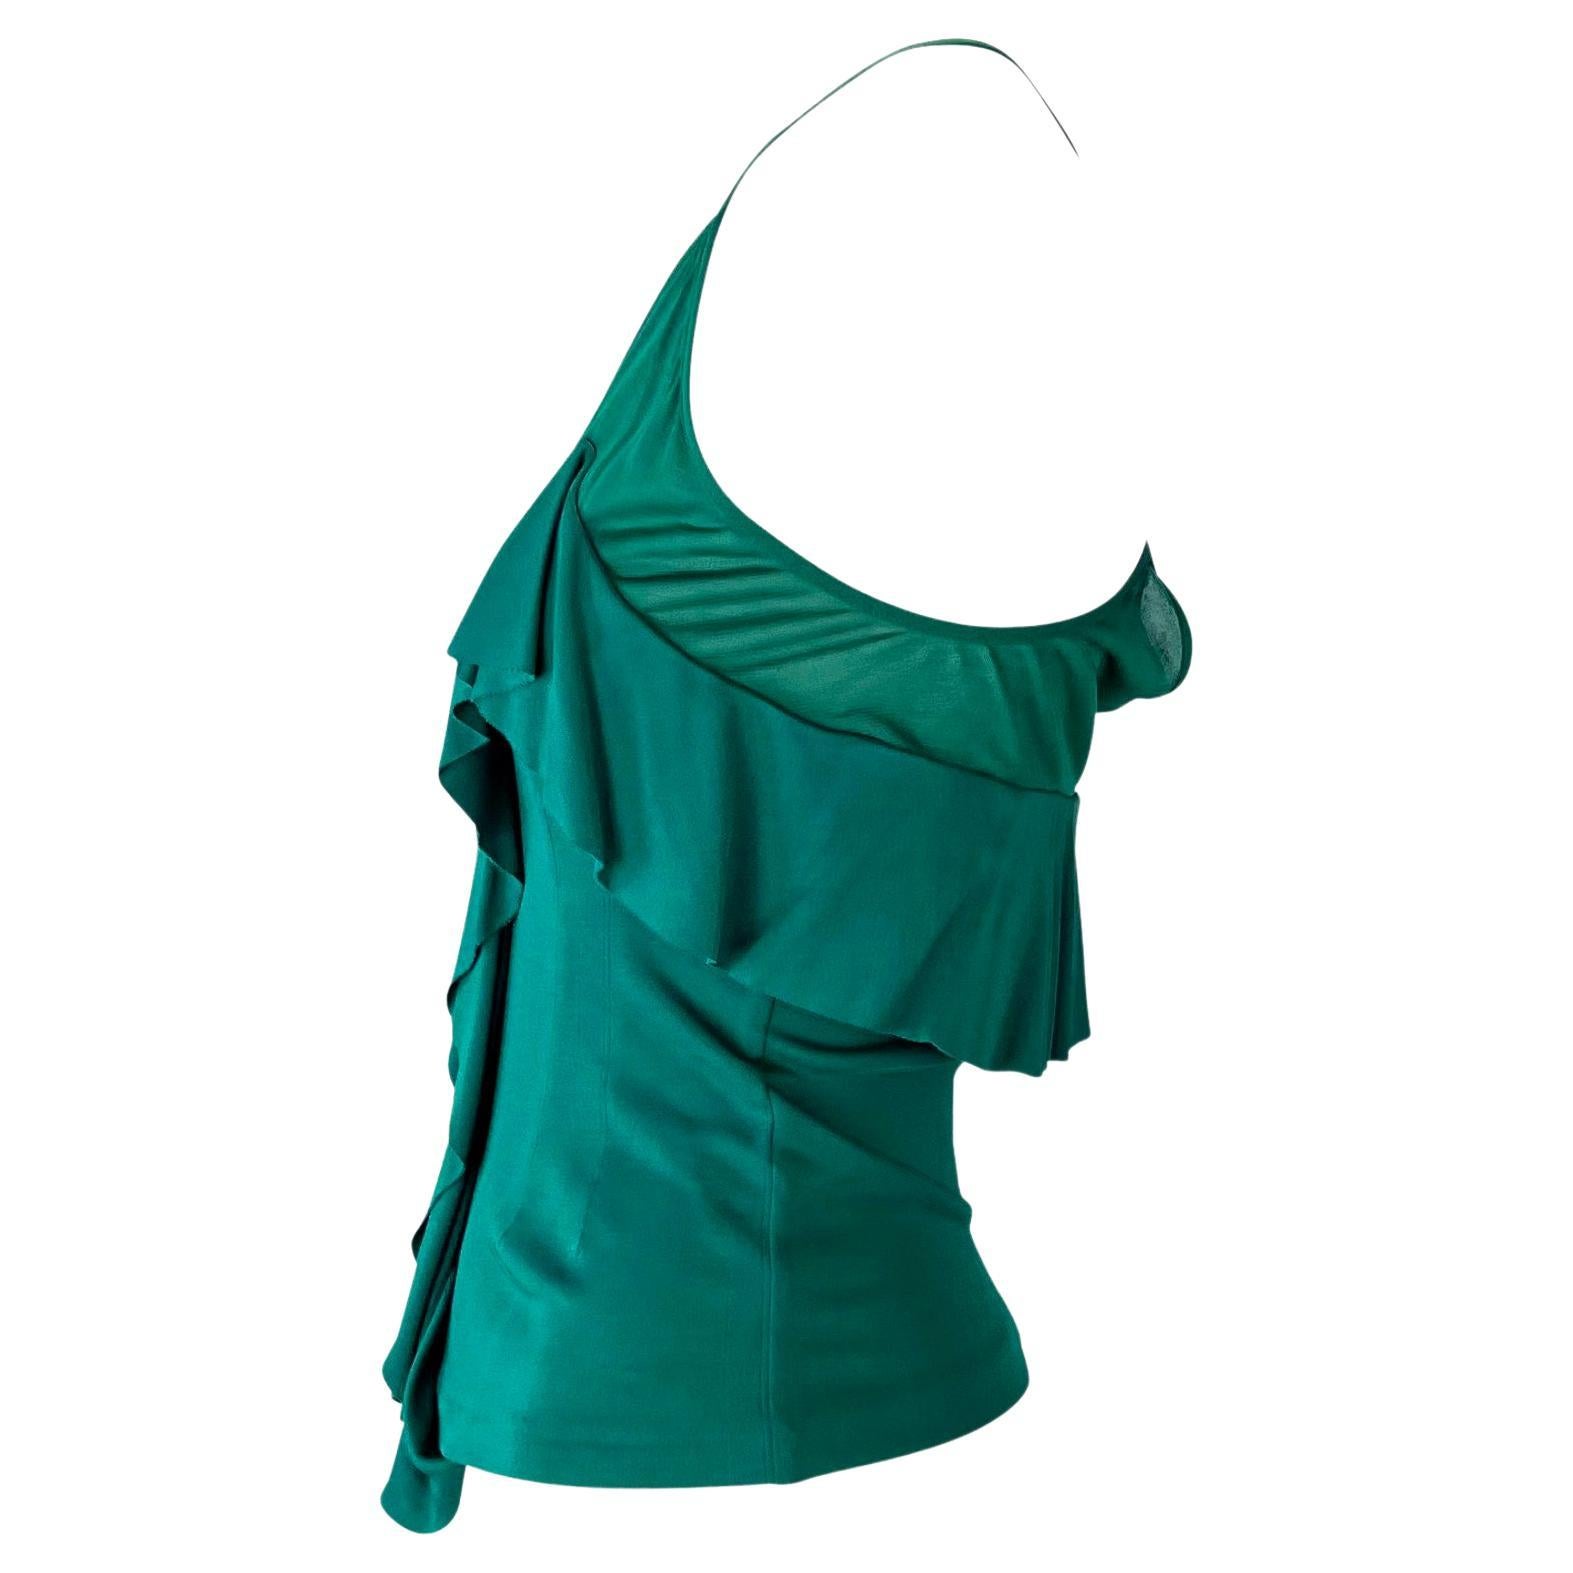 F/W 2003 Yves Saint Laurent by Tom Ford Teal Green Sheer Ruffle Tank Top For Sale 1